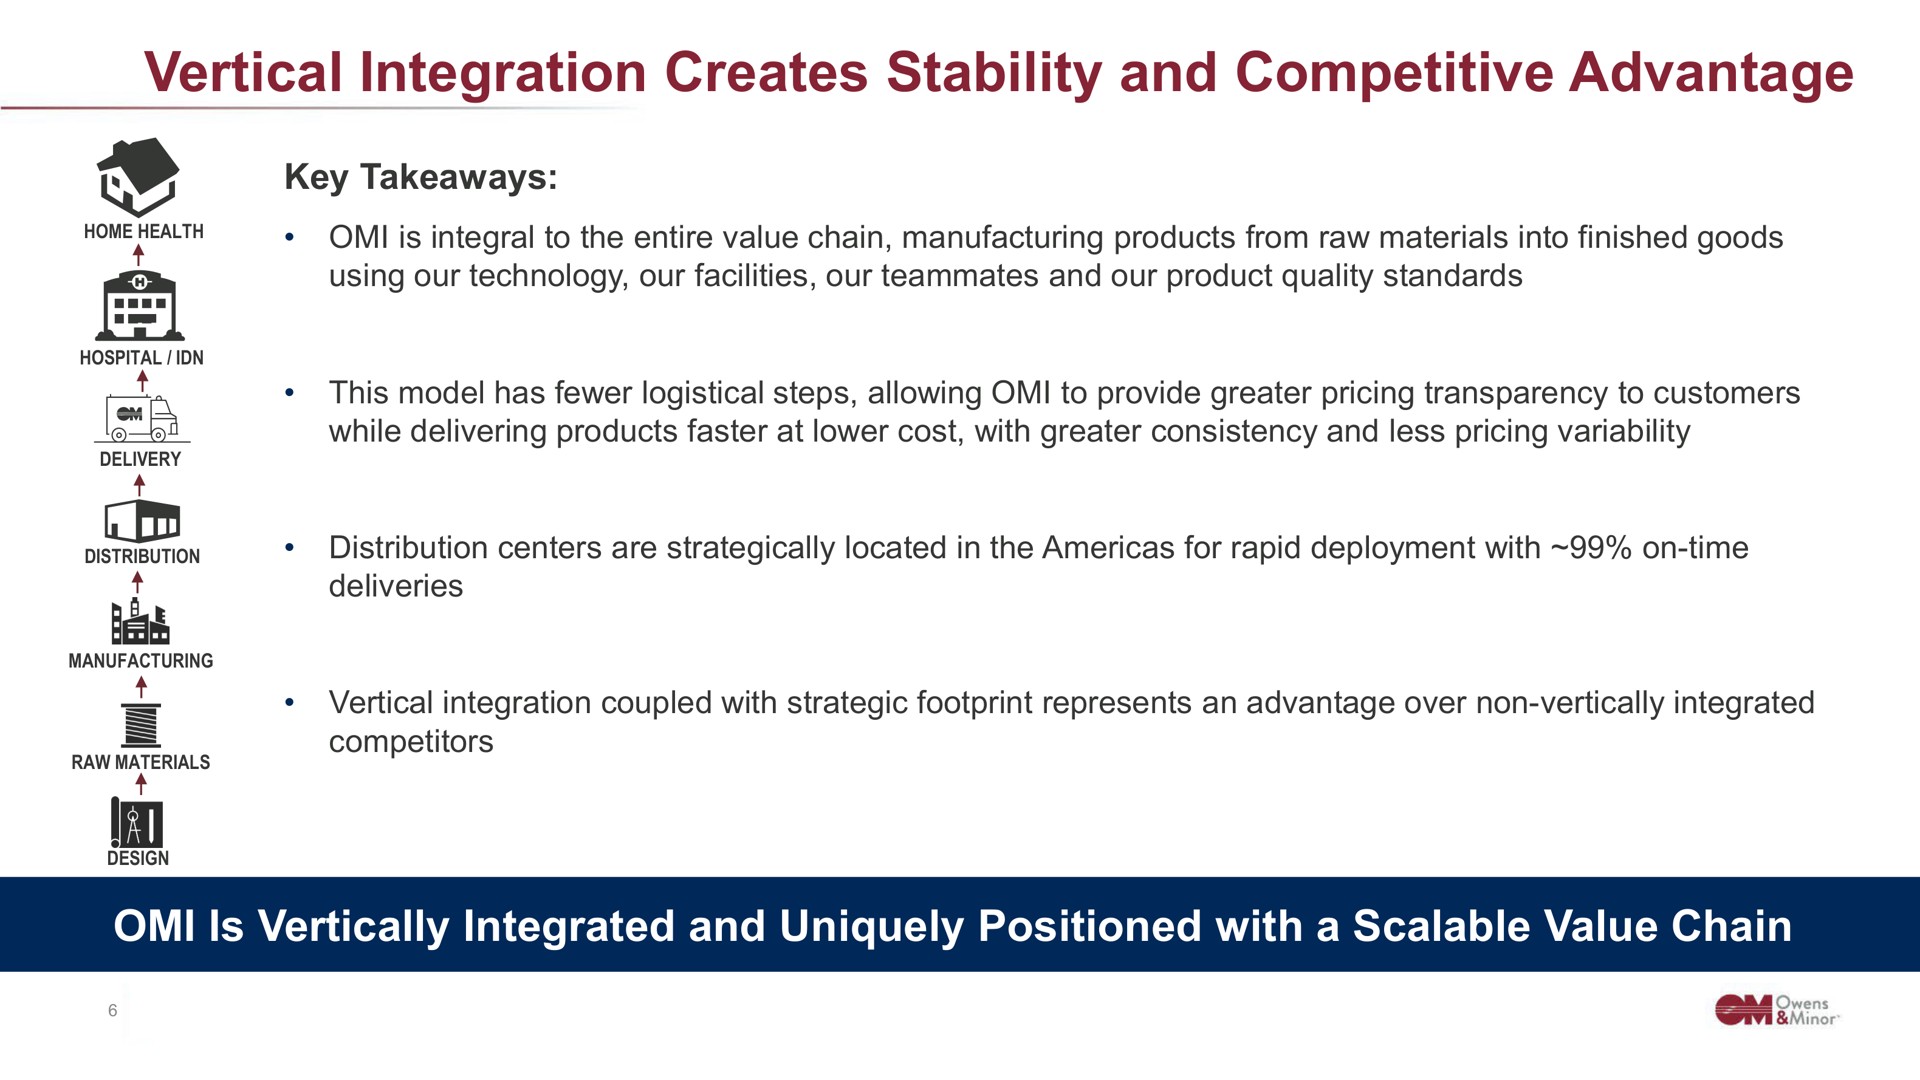 vertical integration creates stability and competitive advantage is vertically integrated and uniquely positioned with a scalable value chain | Owens&Minor